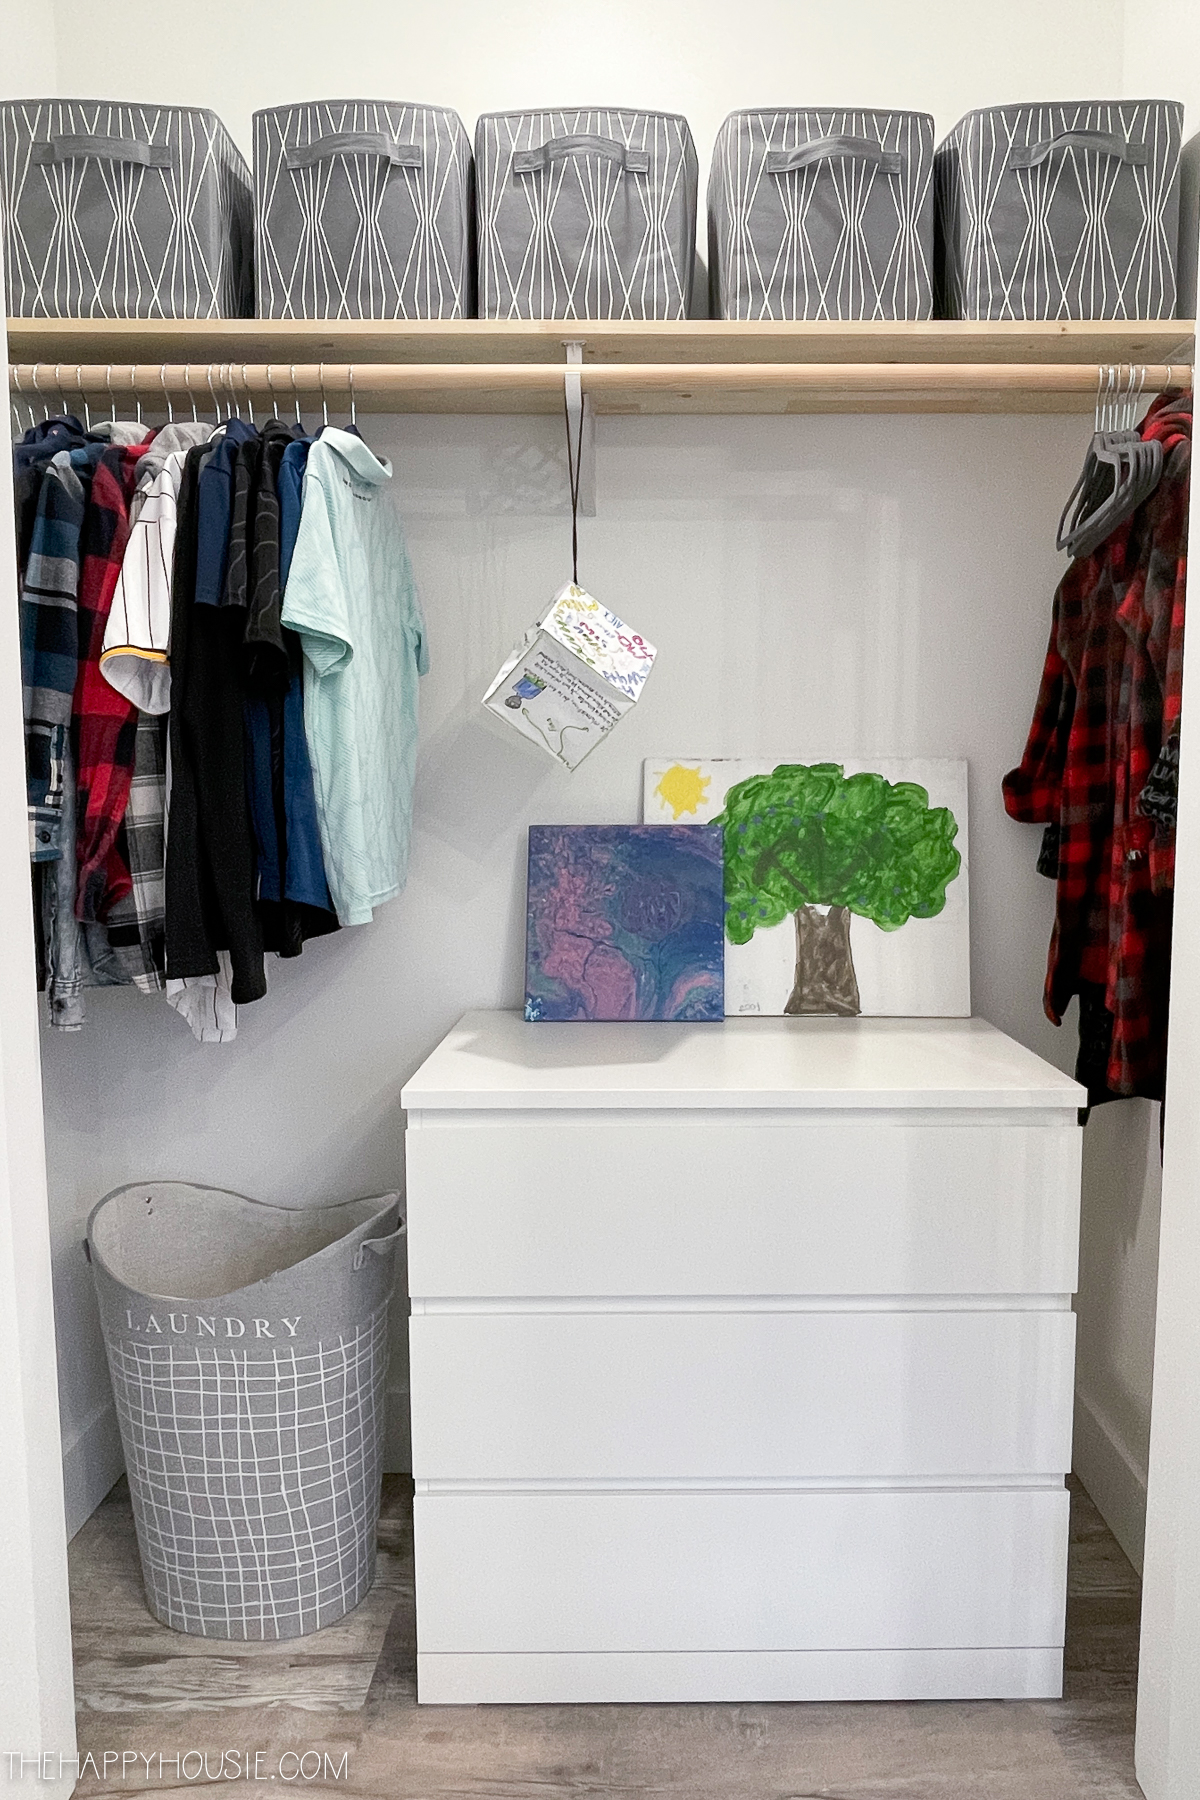 room organization ideas picture of dresser in closet for extra storage